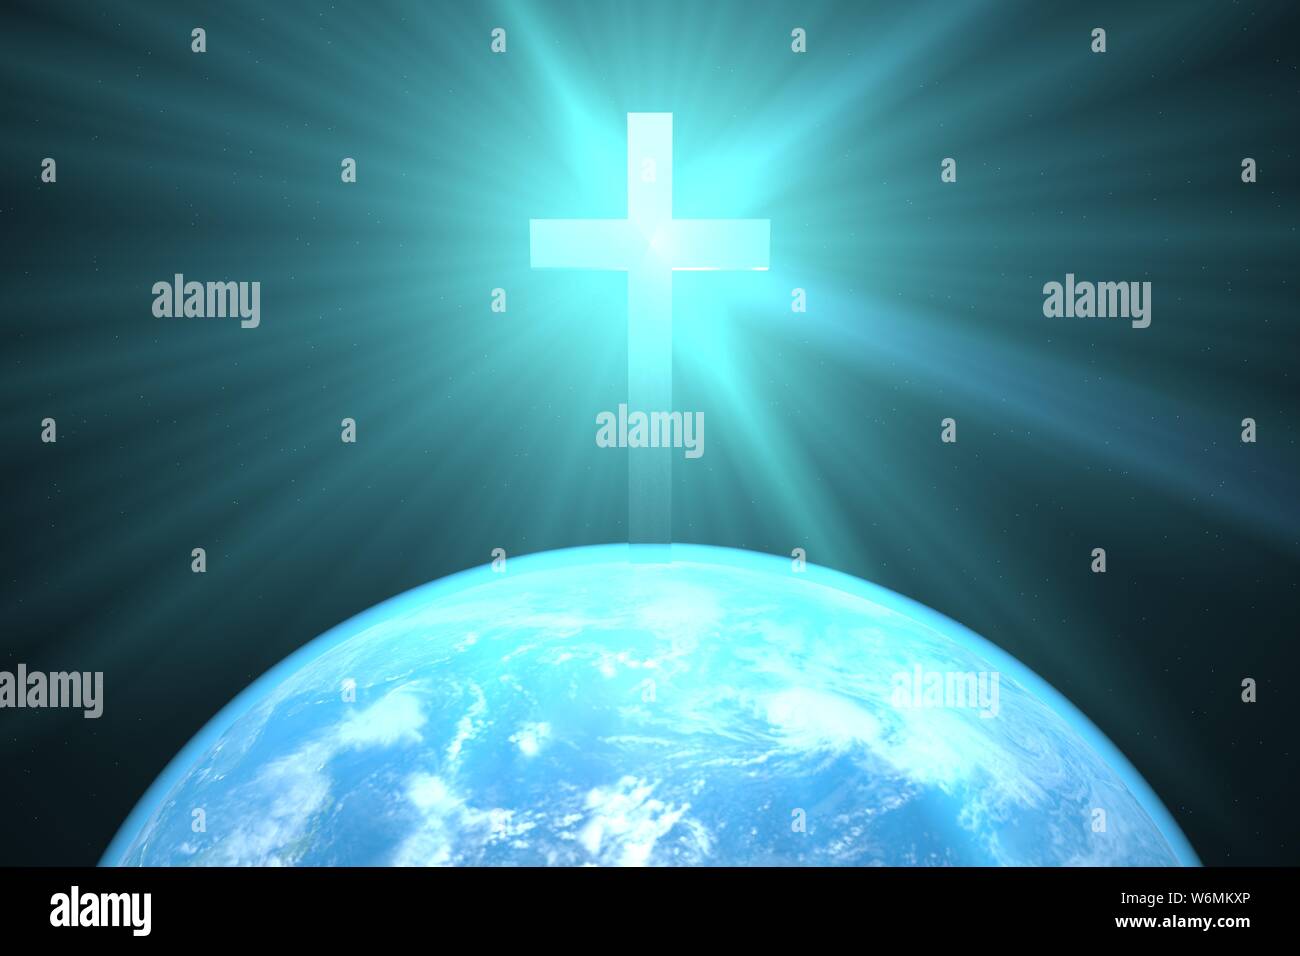 3d illustration: The Christian cross over the planet earth sheds a blessed blue light on the people of the world. Christianity. Religious concept. Stock Photo